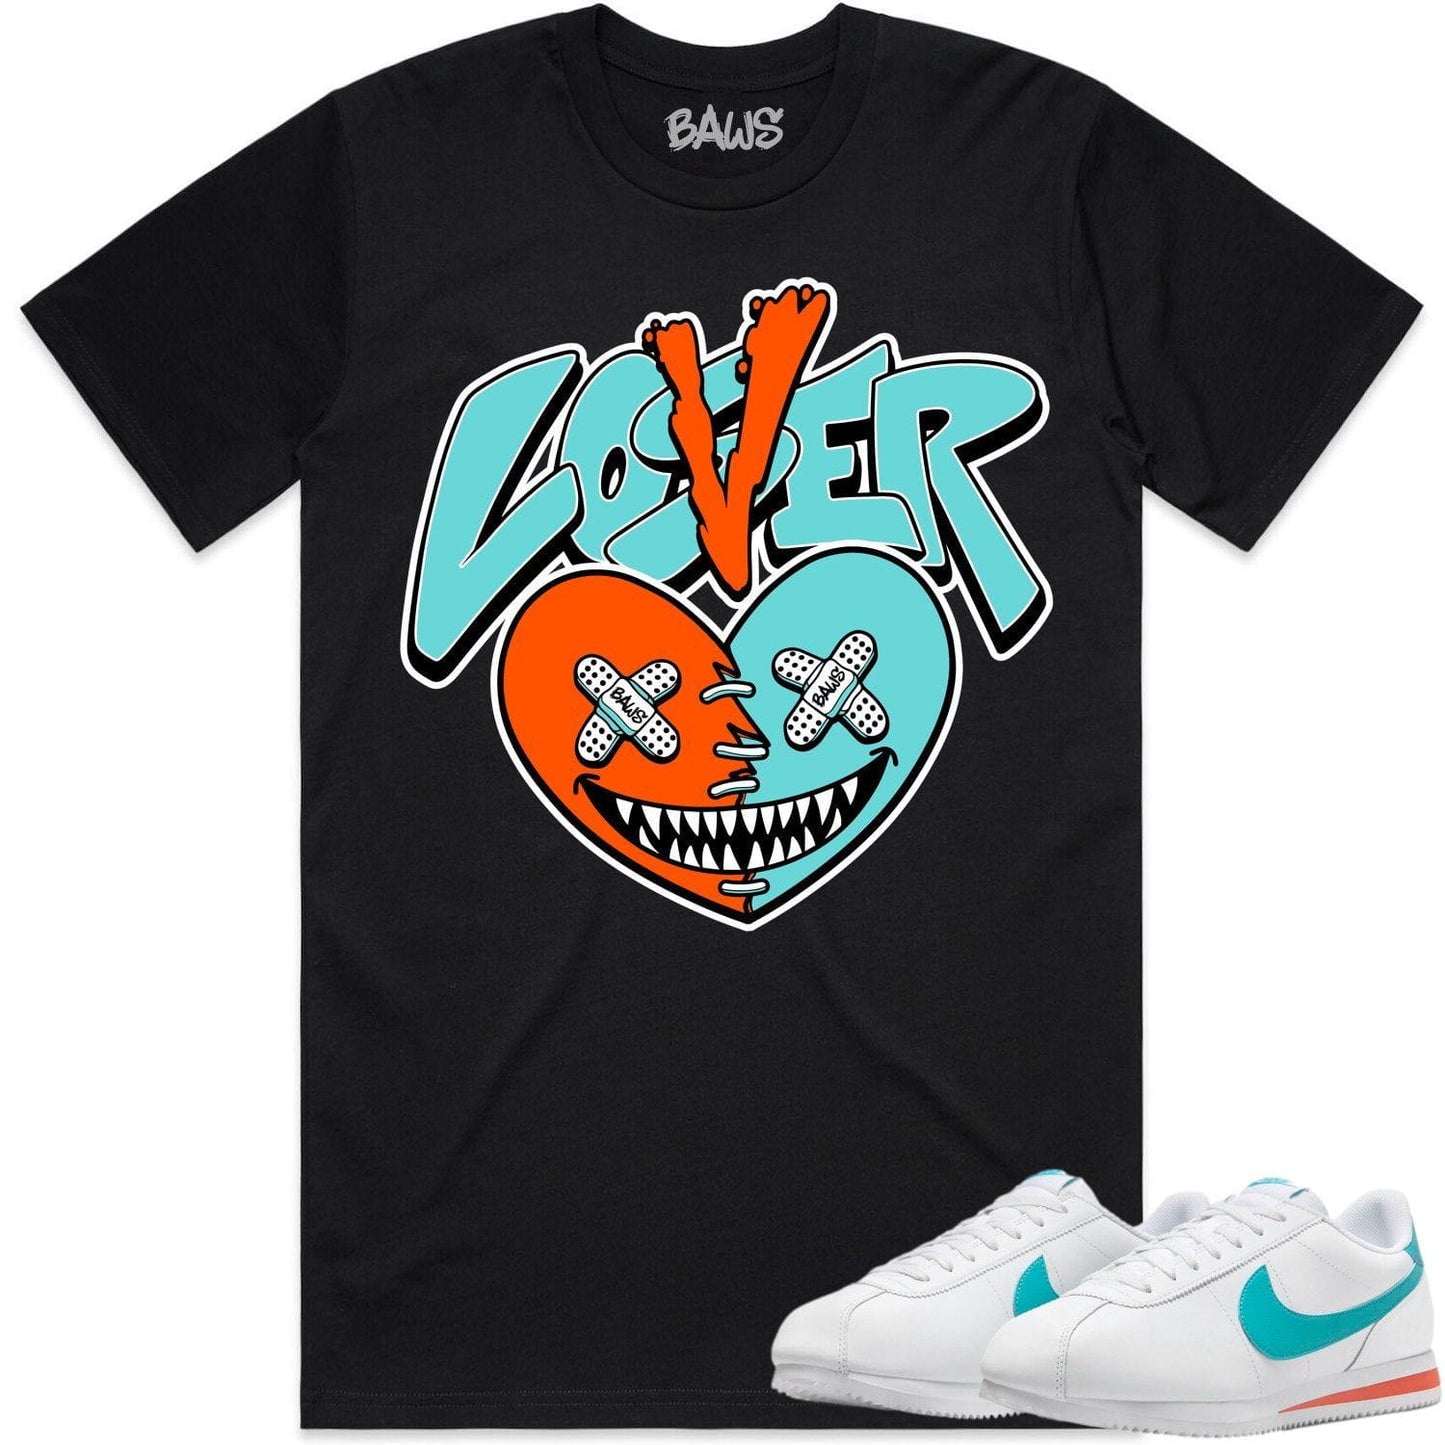 Miami Cortez Dolphins Shirt - Dolphins Sneaker Tees - Lover Loser Baws